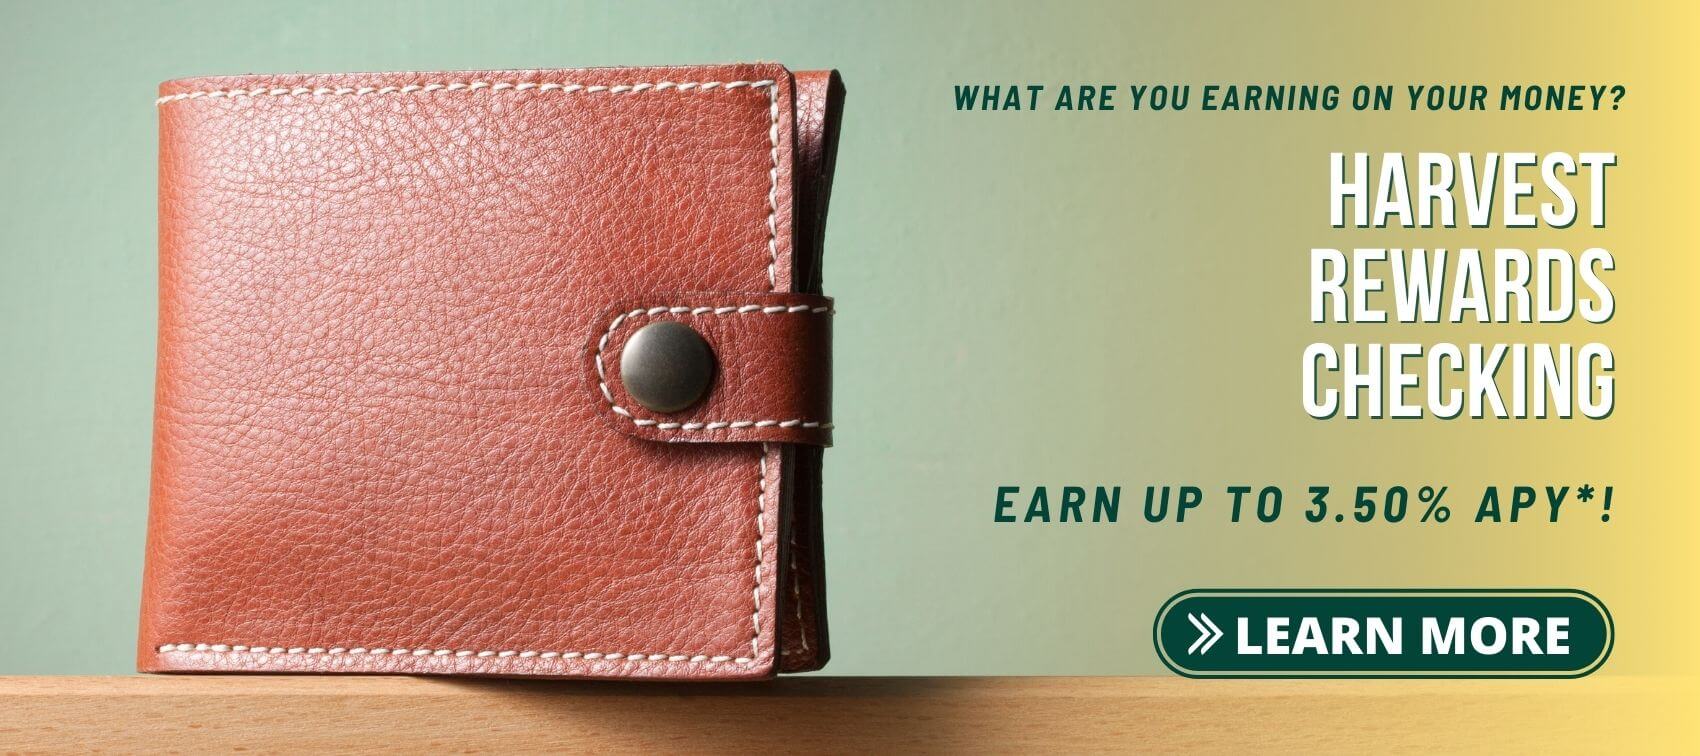 What are you earning on your money? Harvest rewards checking. Earn up to 3.5% APY*! Learn More